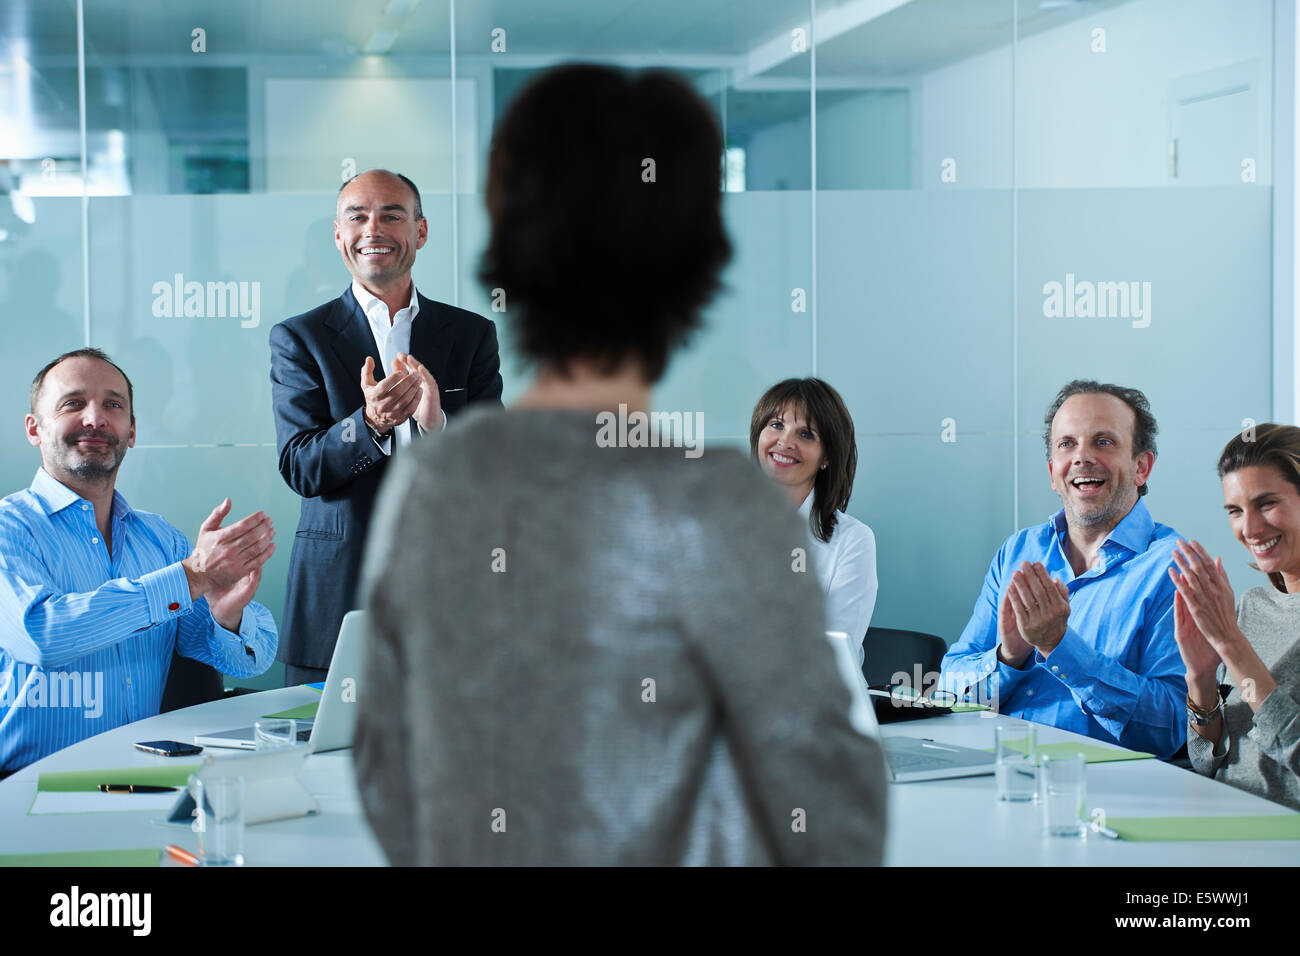 Businessmen and women applauding around boardroom table Stock Photo